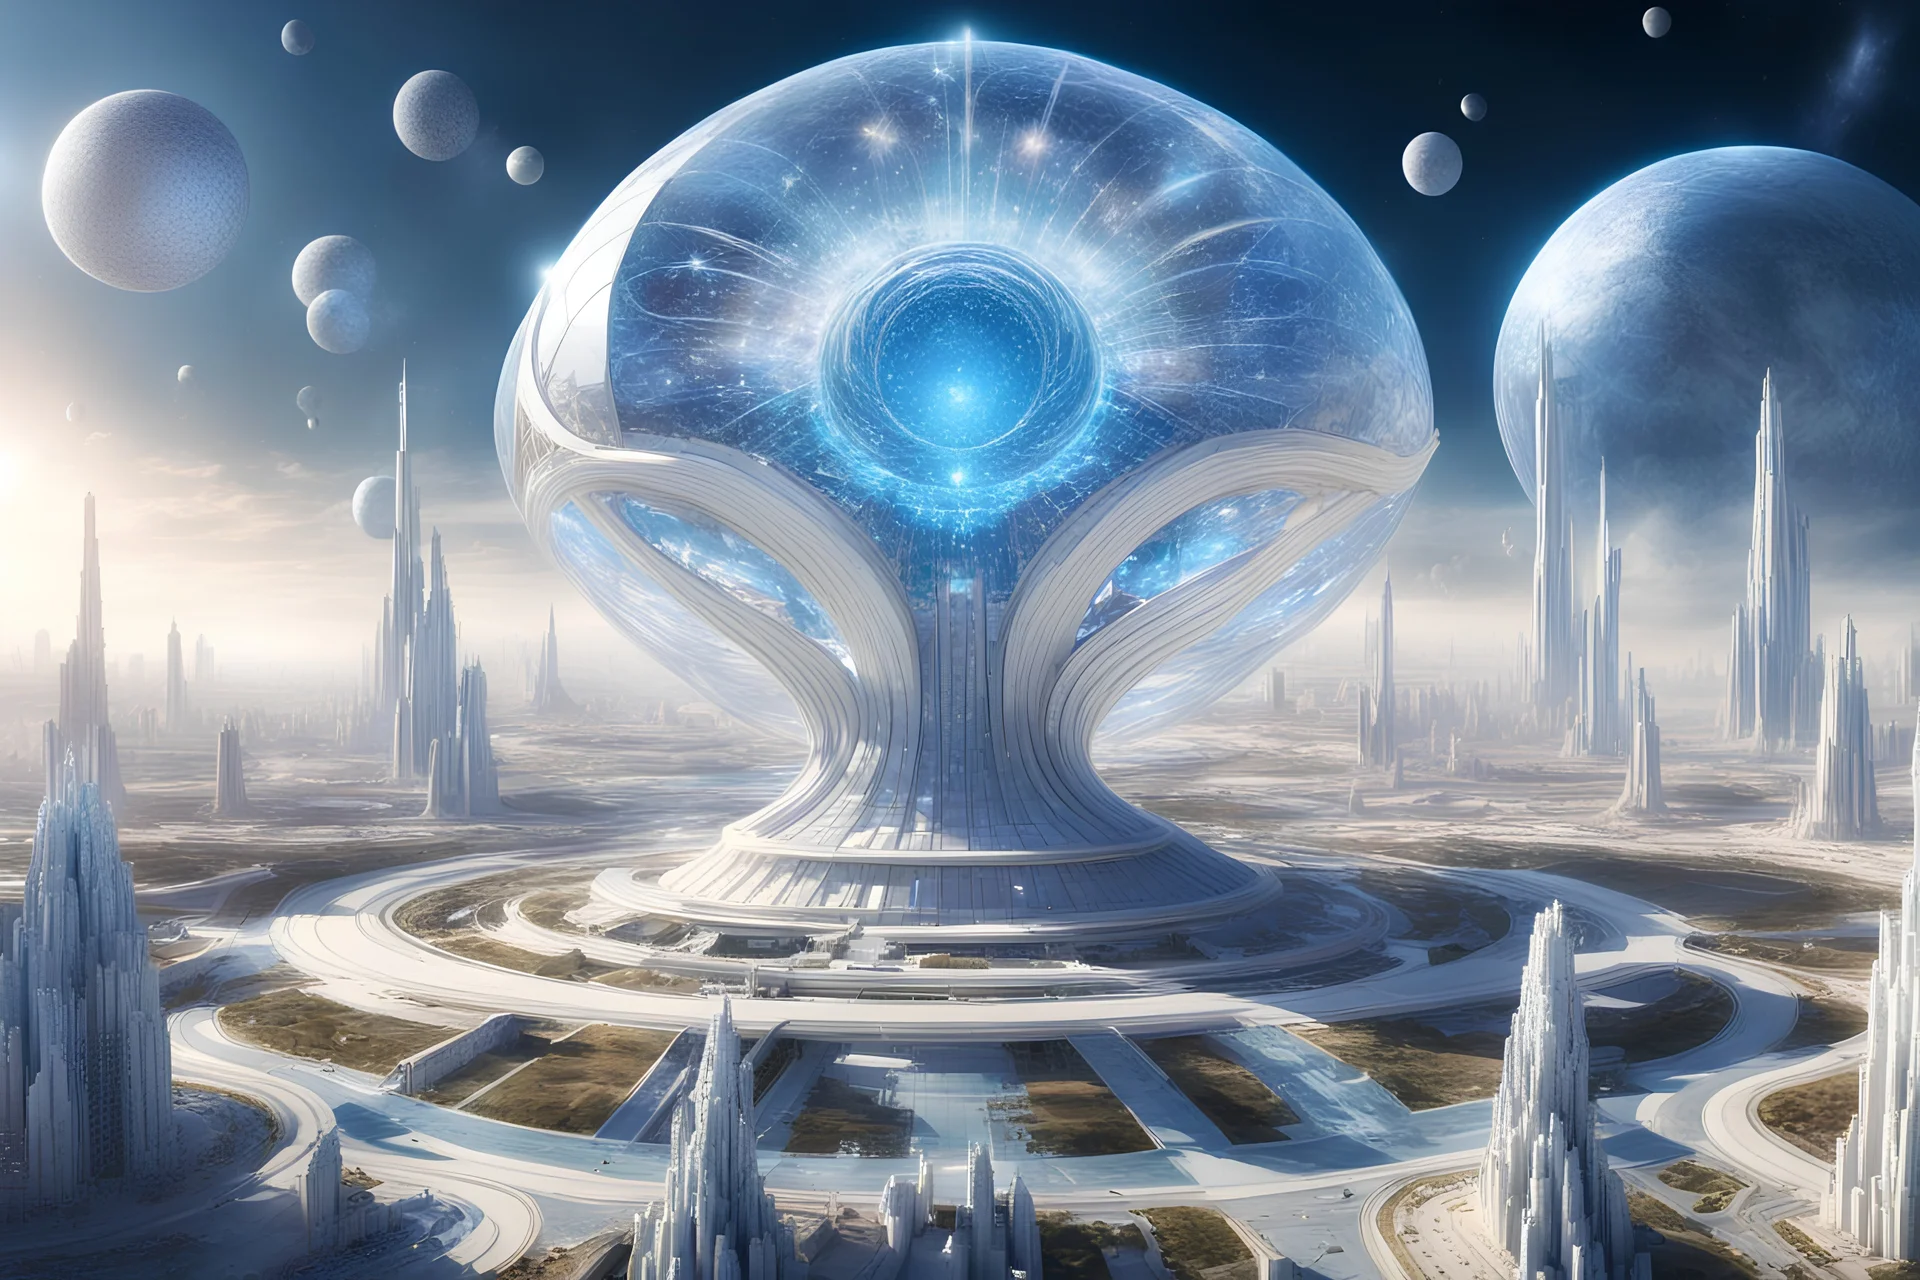 confederation of unified worlds, field of pure crystalline permanence,great hight spirale cosmic city extraterrestre white futuriste, great and blue facette cristal dome, vaisseaux spatiaux, 4k, hyperréaliste, cosmic srars sky, great civilisation, beautifull, pure spiritual inspiration of unity,